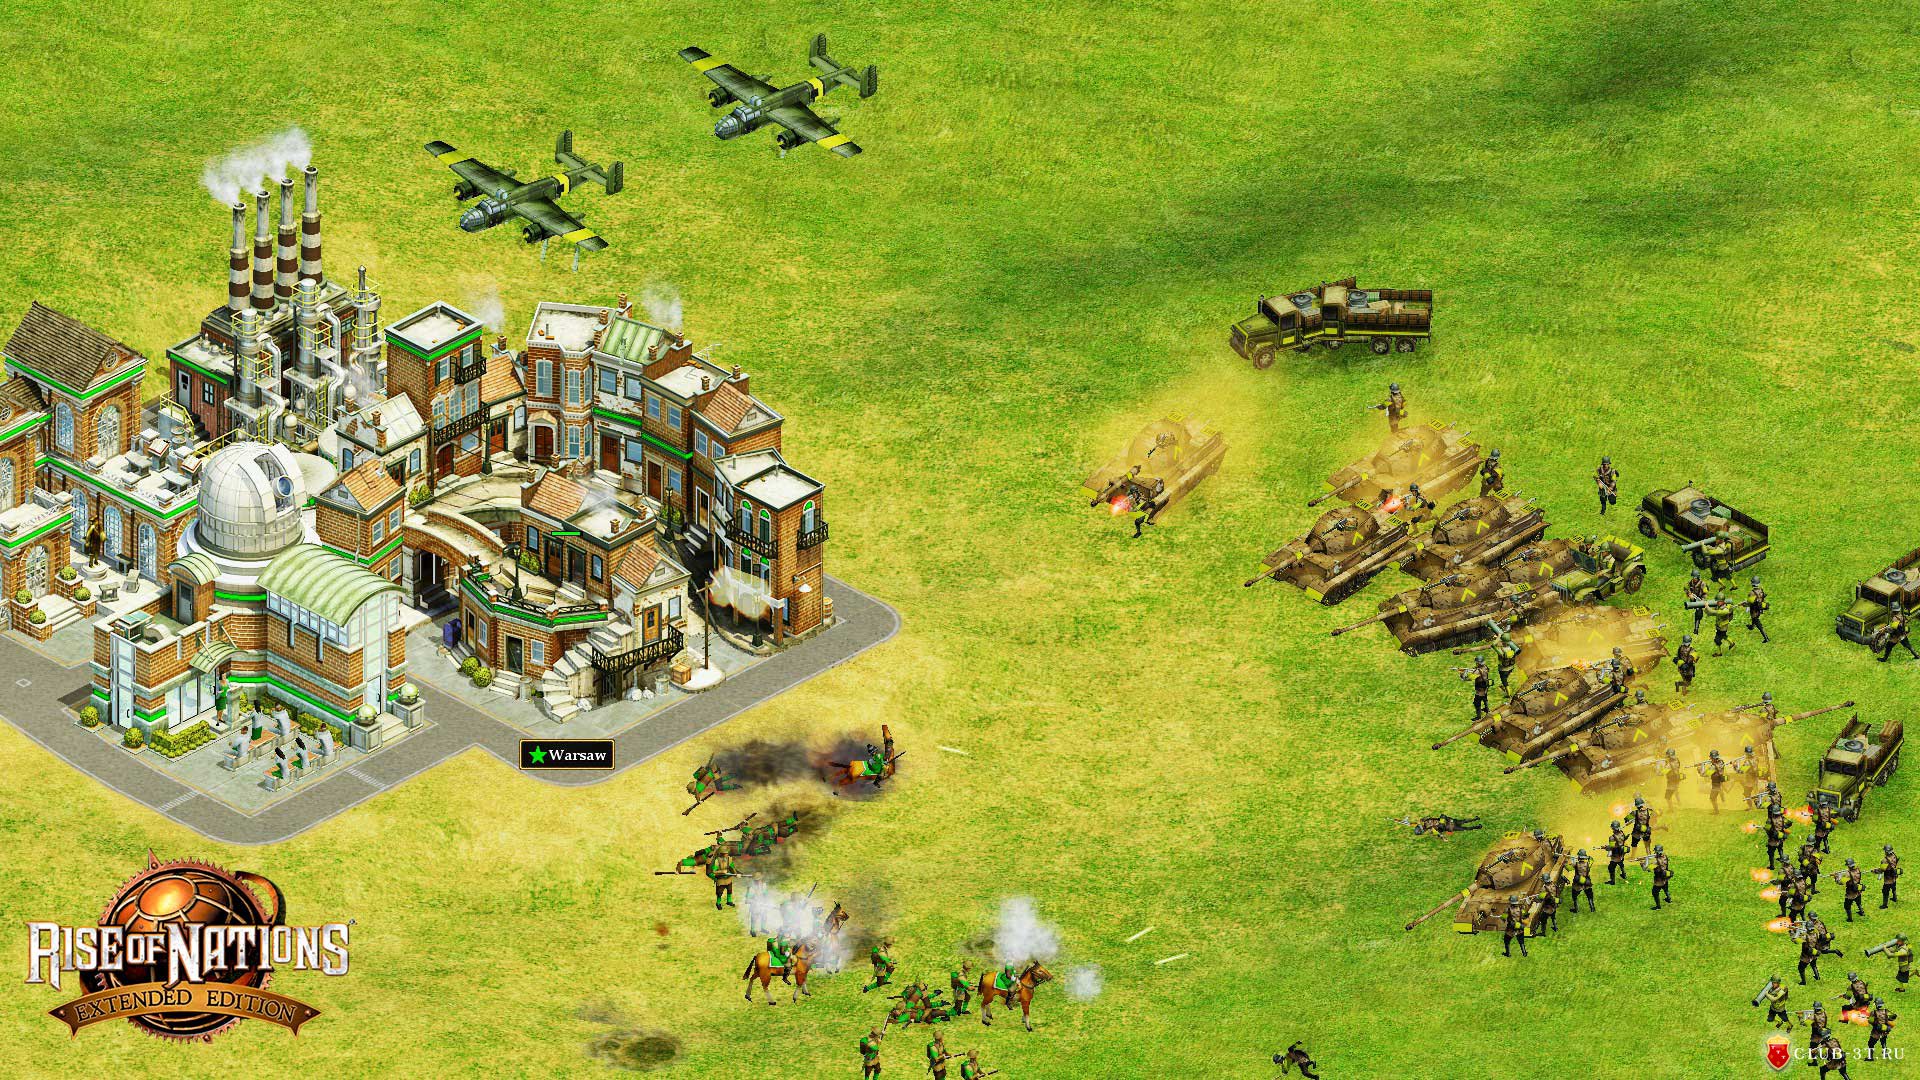 Rise Of Nations Extended Edition V0.2009 Trainer +12 